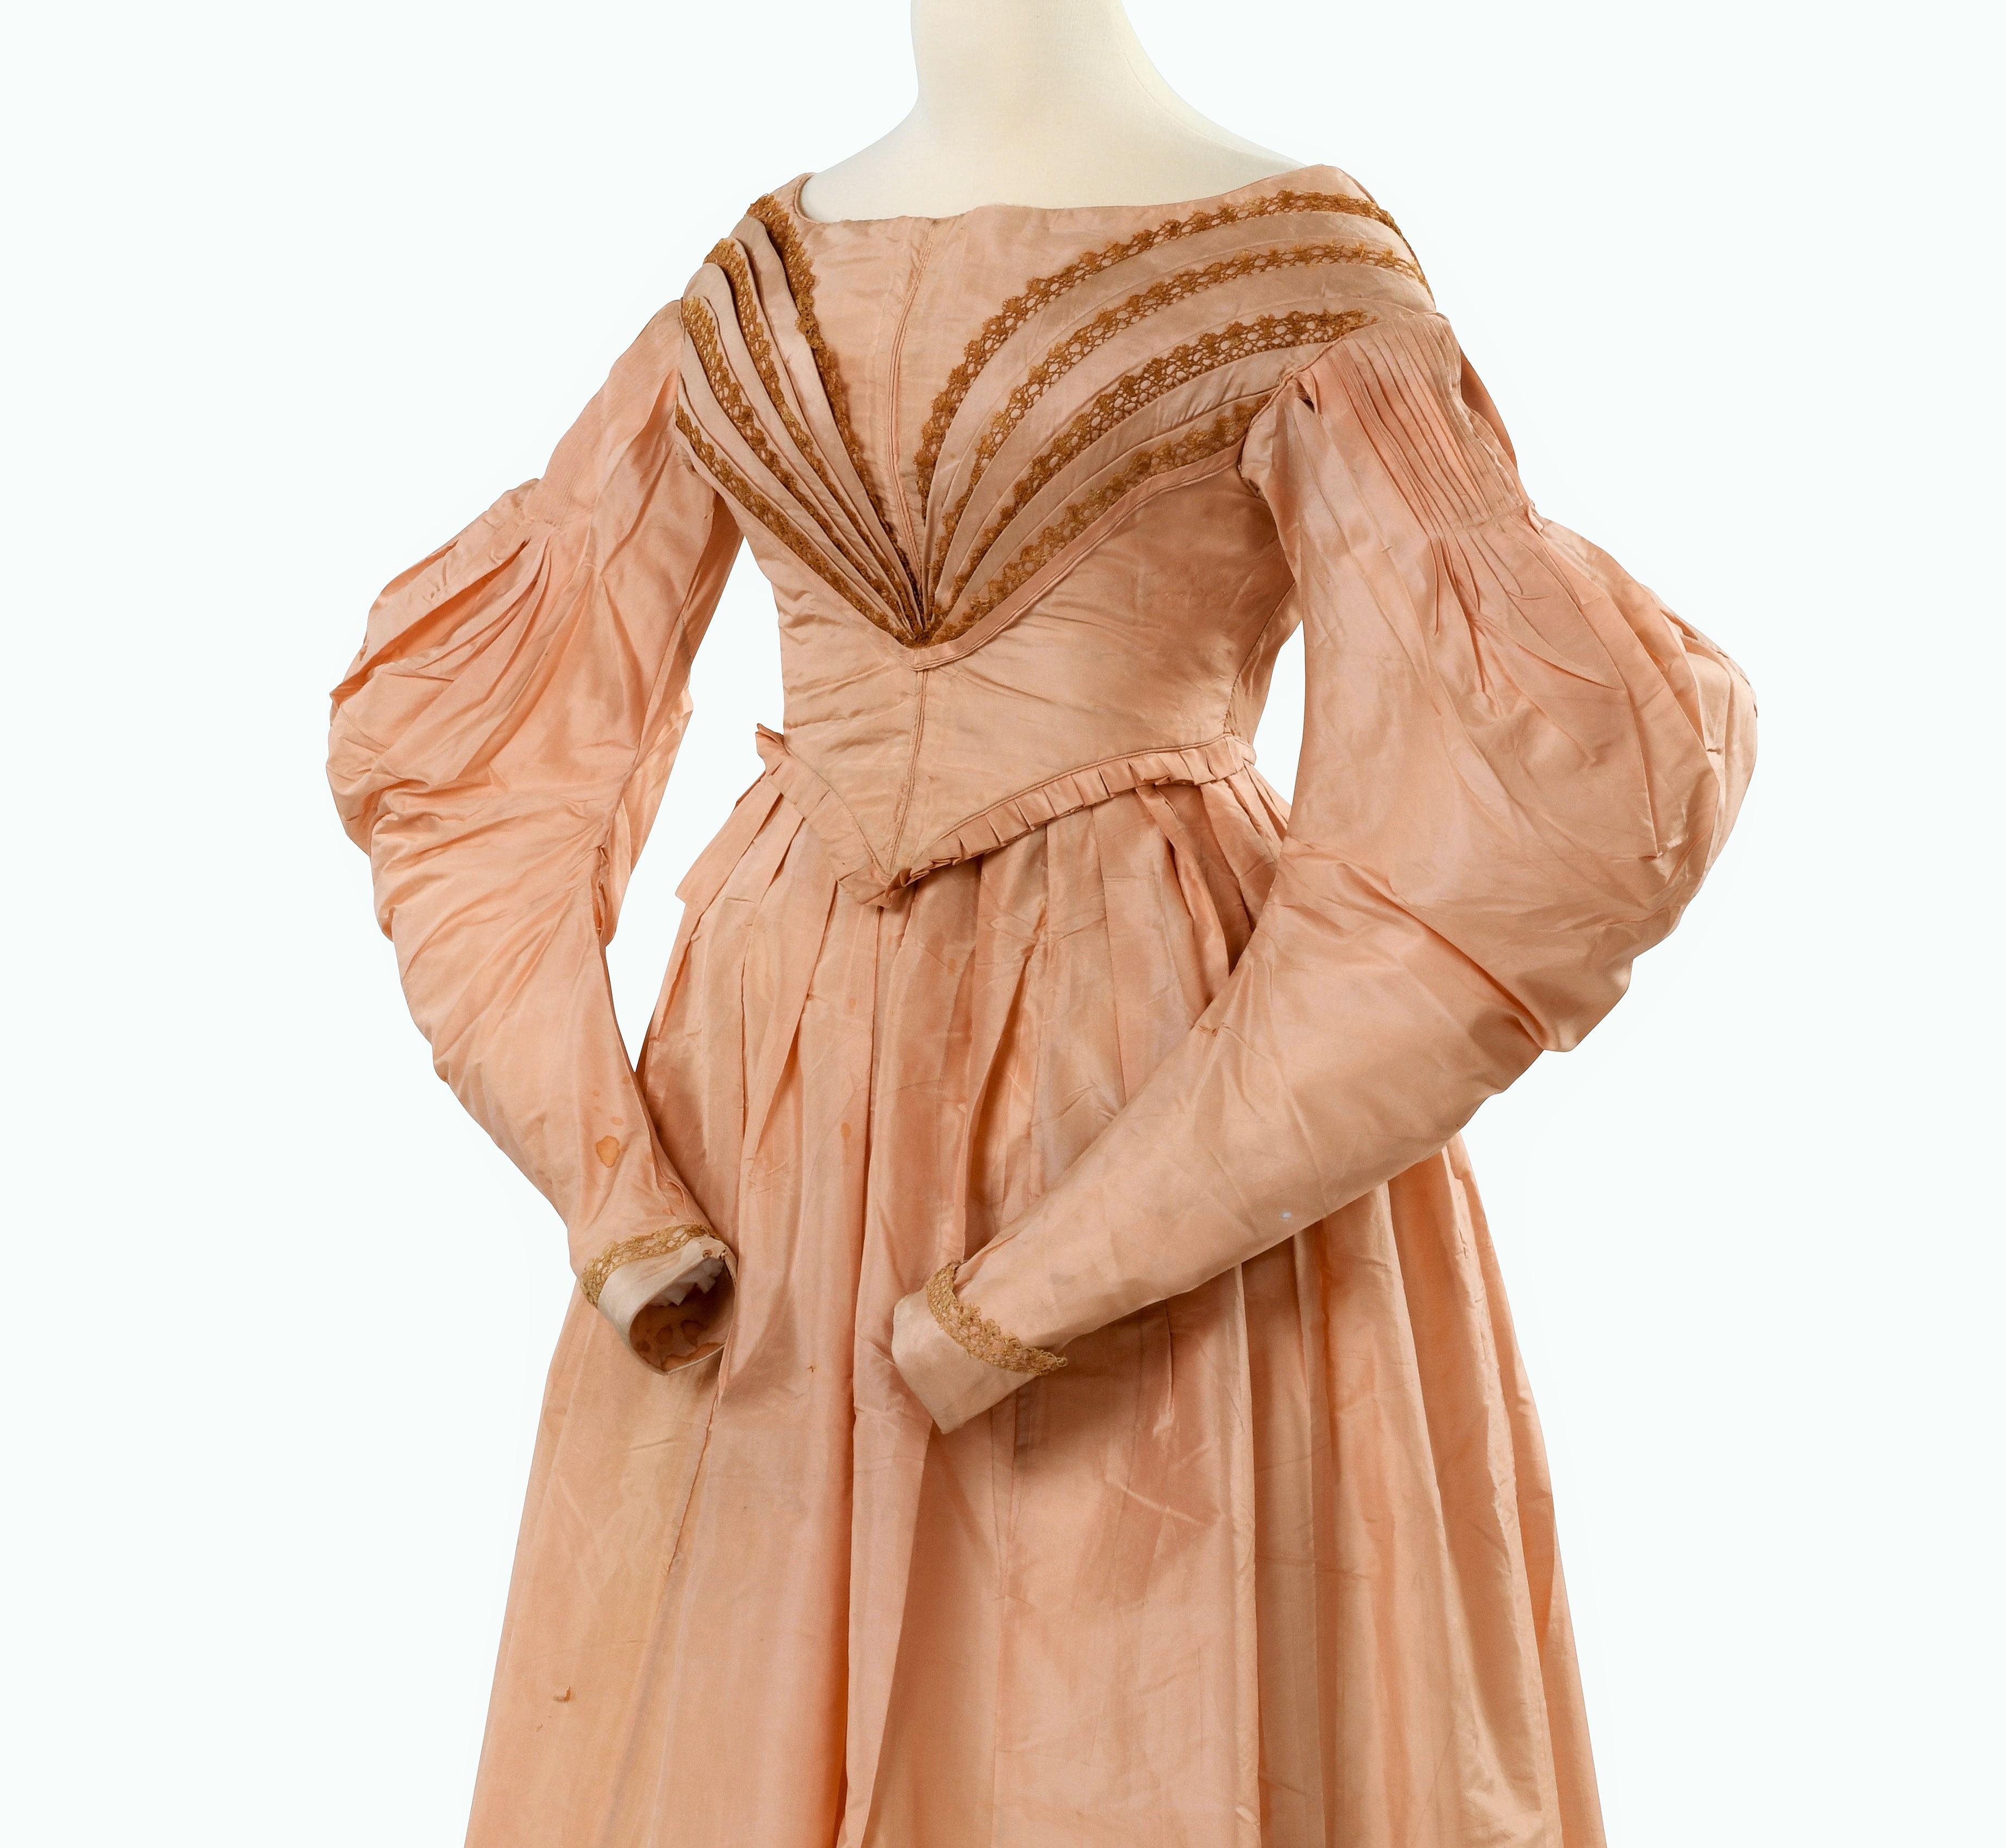 Circa 1835-1840
France

Romantic period dress in pale pink Florence taffeta dating from the reign of Louis-Philippe. Dress lined with cream cotton, with a separate bodice effect, pointed in front and closed by hooks in the back with a V-shaped cut. 